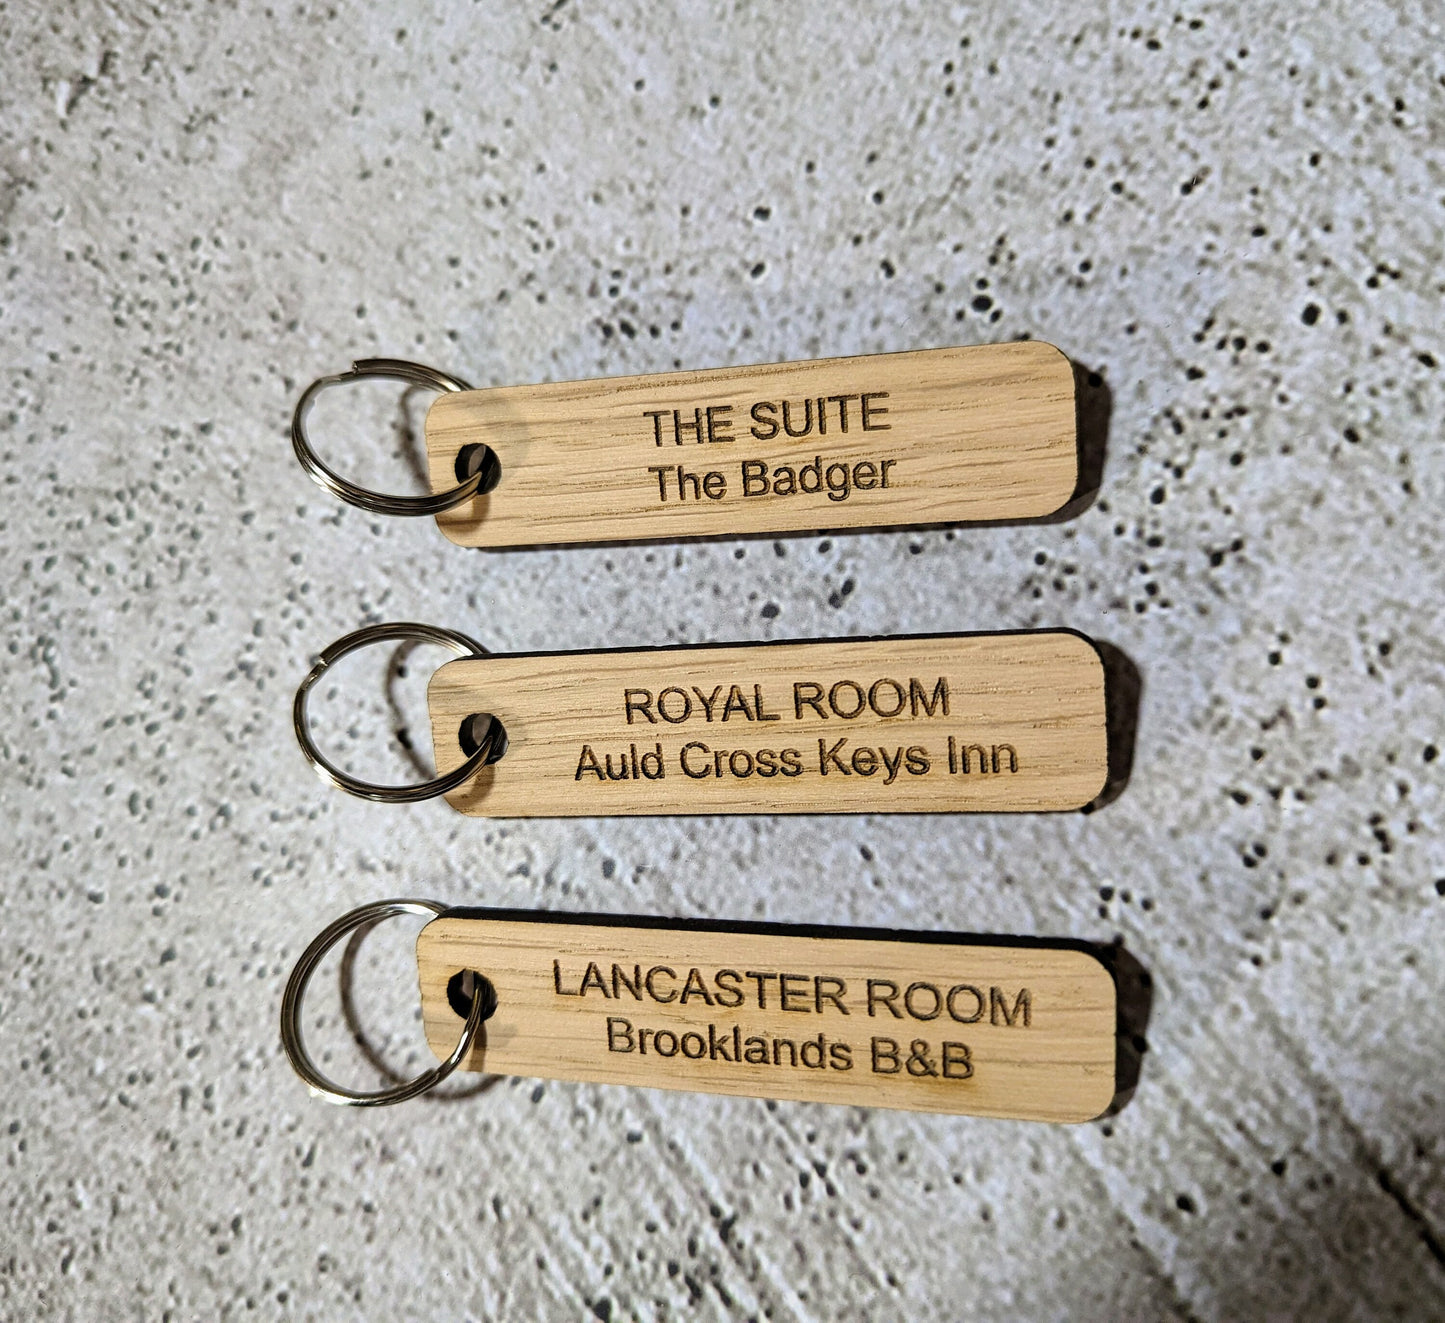 Custom Wooden Room Keyrings for Hotels, B&Bs, Airbnbs, and Guest Houses